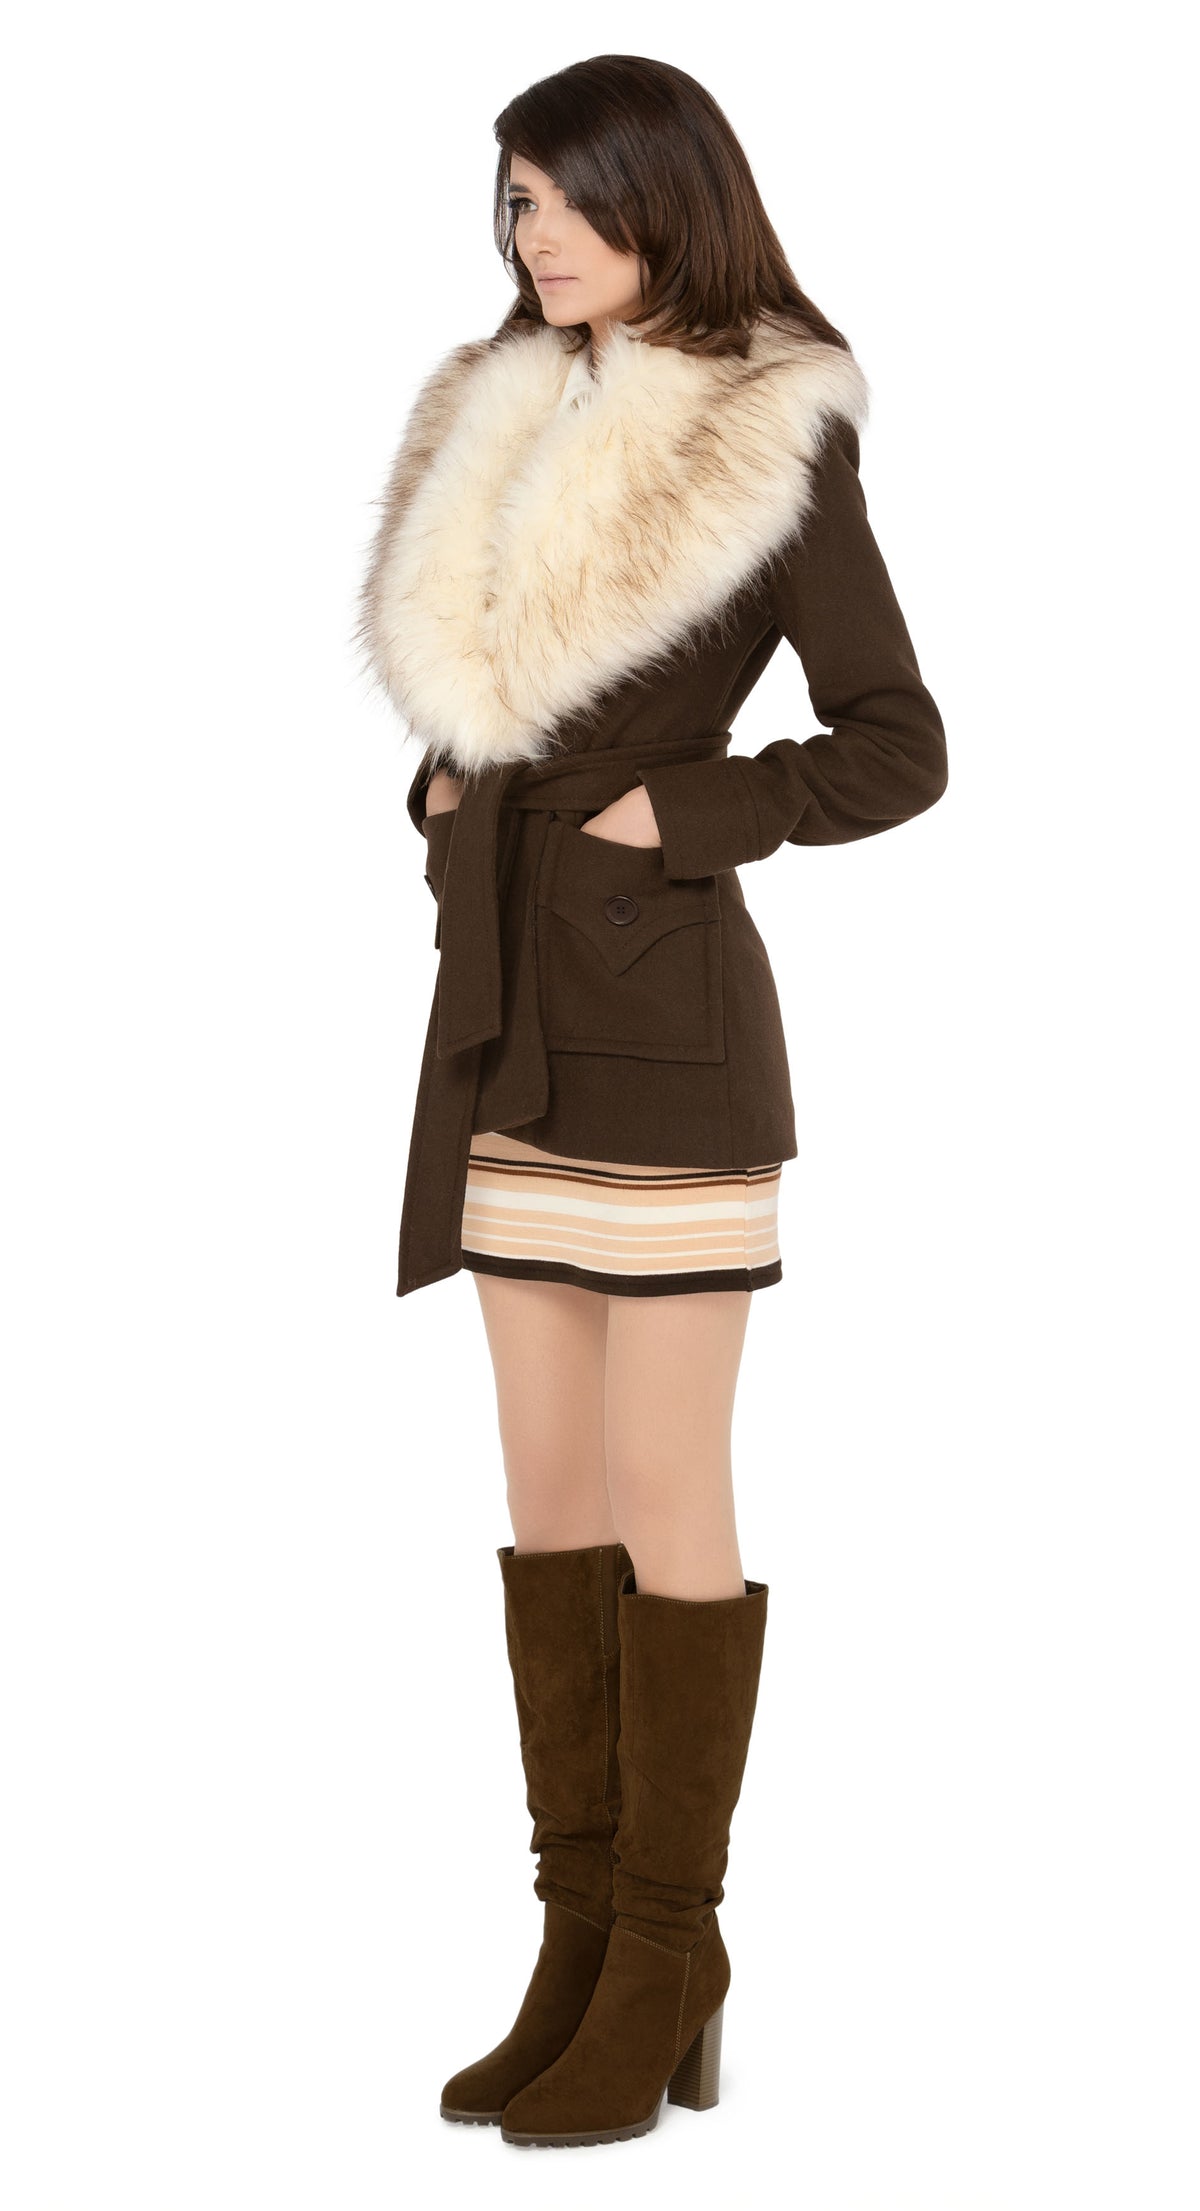 Immediately striking seventies winter jacket with indistinguishable from the real thing cruelty free cream oversized faux fur collar, top stitched deep essentials front pockets and belt closure.   Cozy, comfy and cool.  Pairs well with our 1970s Style Jersey Dress to complete the look.  Unsure of your size? Use our chat feature.